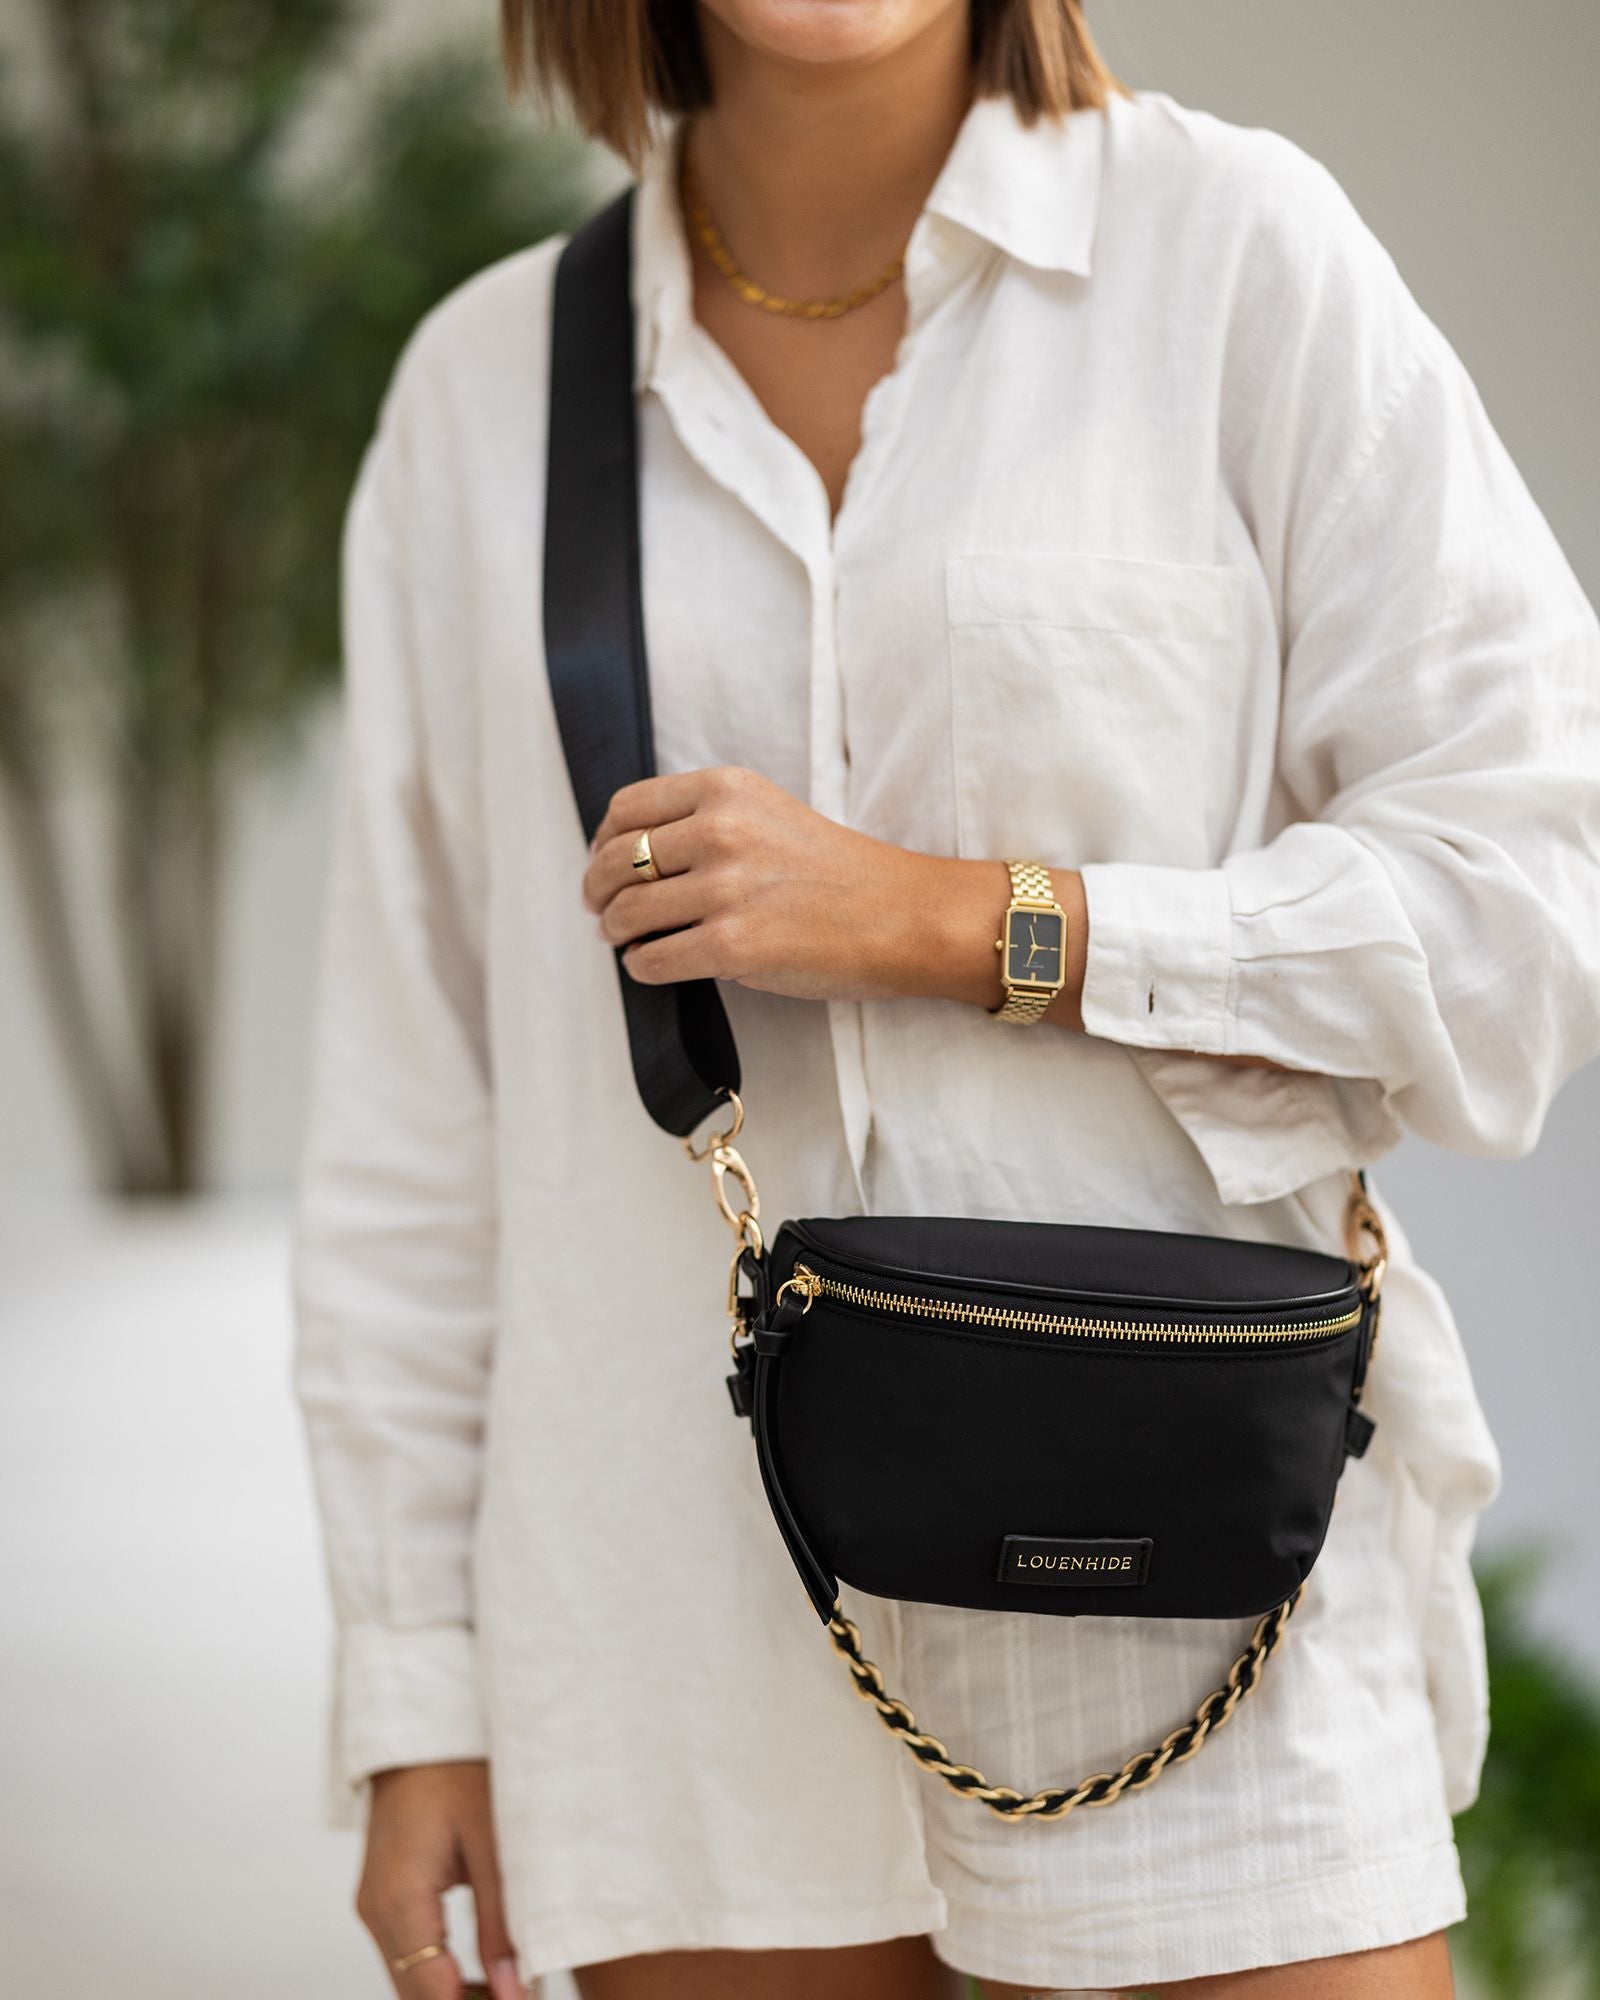 The Louenhide Halsey Nylon Crossbody Bag is the perfect combination of functionality and style. With its adjustable and detachable sateen guitar strap and PU woven shoulder strap, this bag can be worn comfortably as a crossbody or over the shoulder.